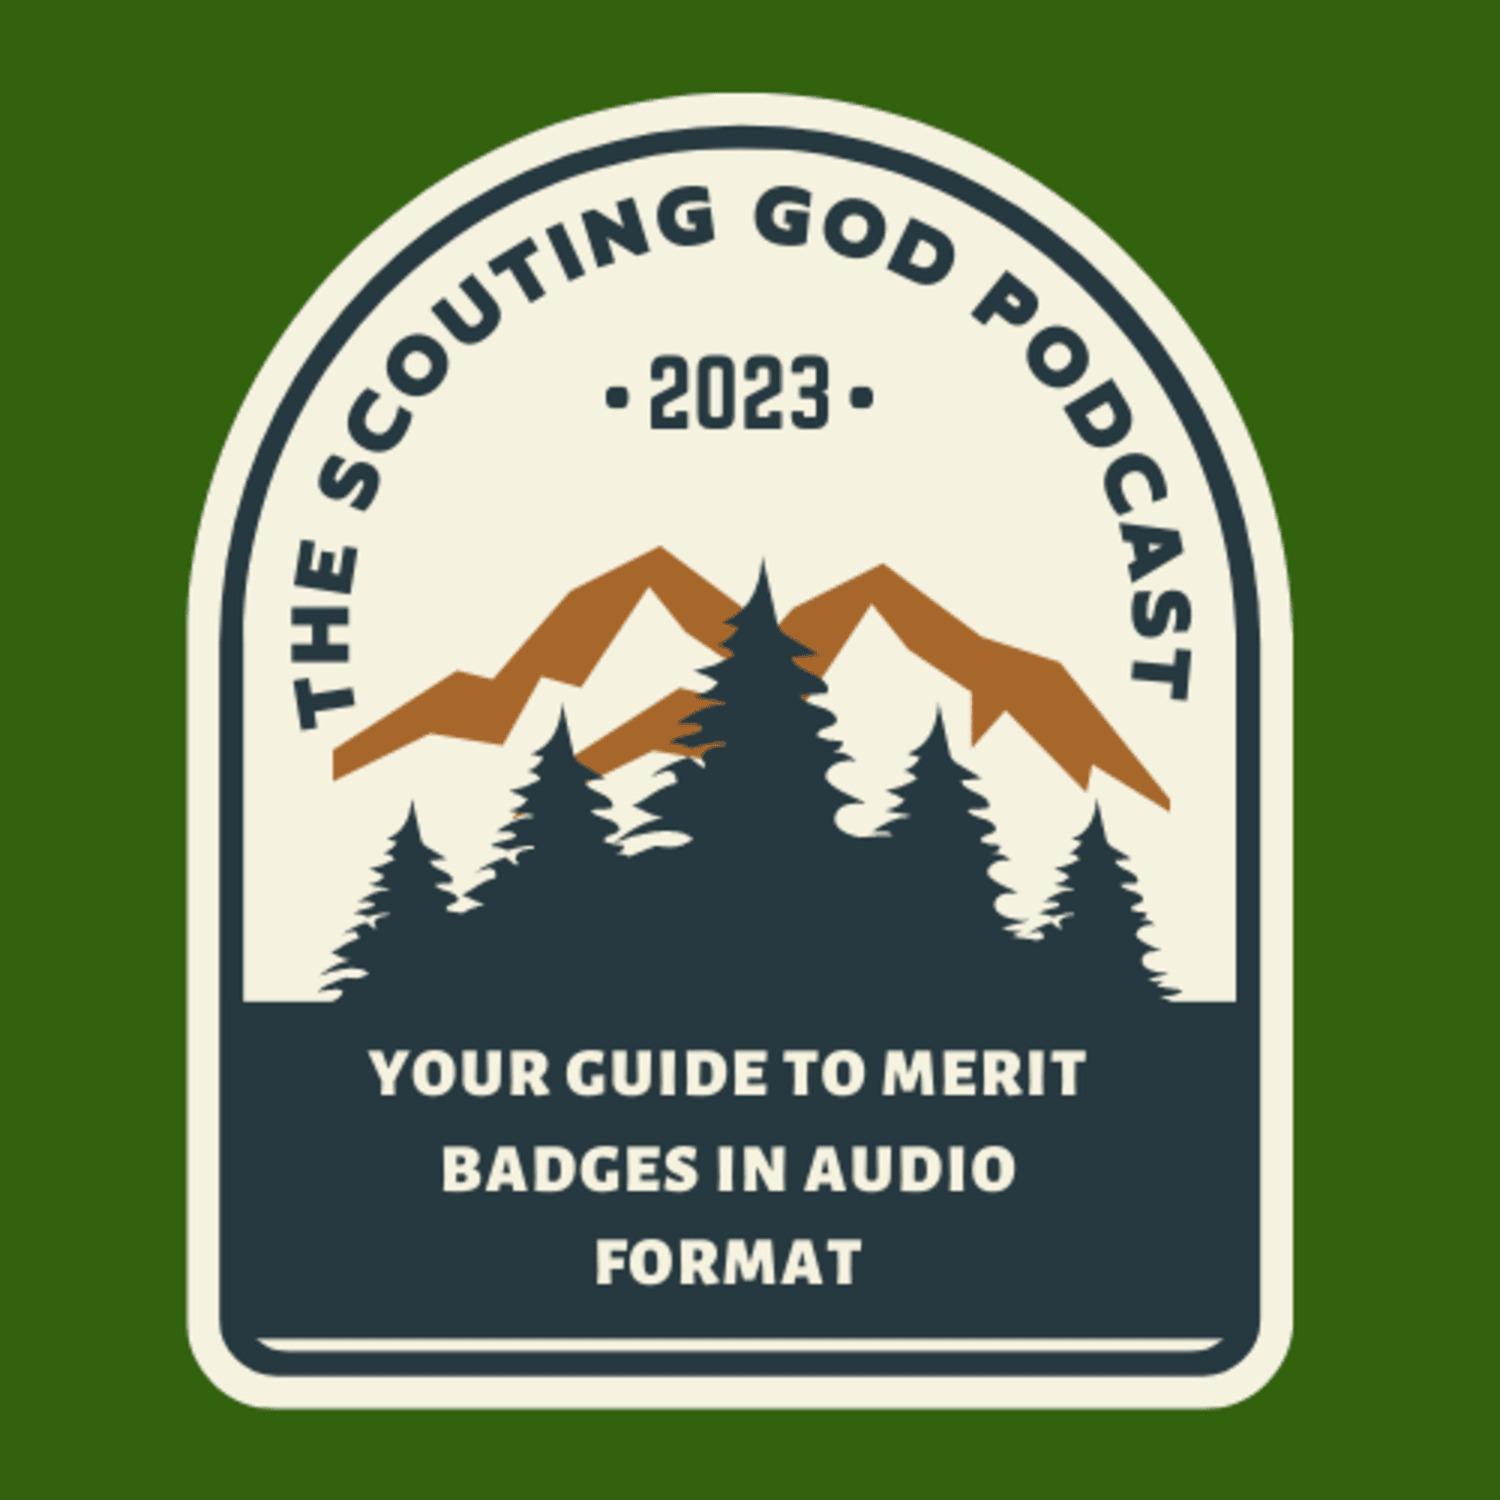 The Scouting God Podcast